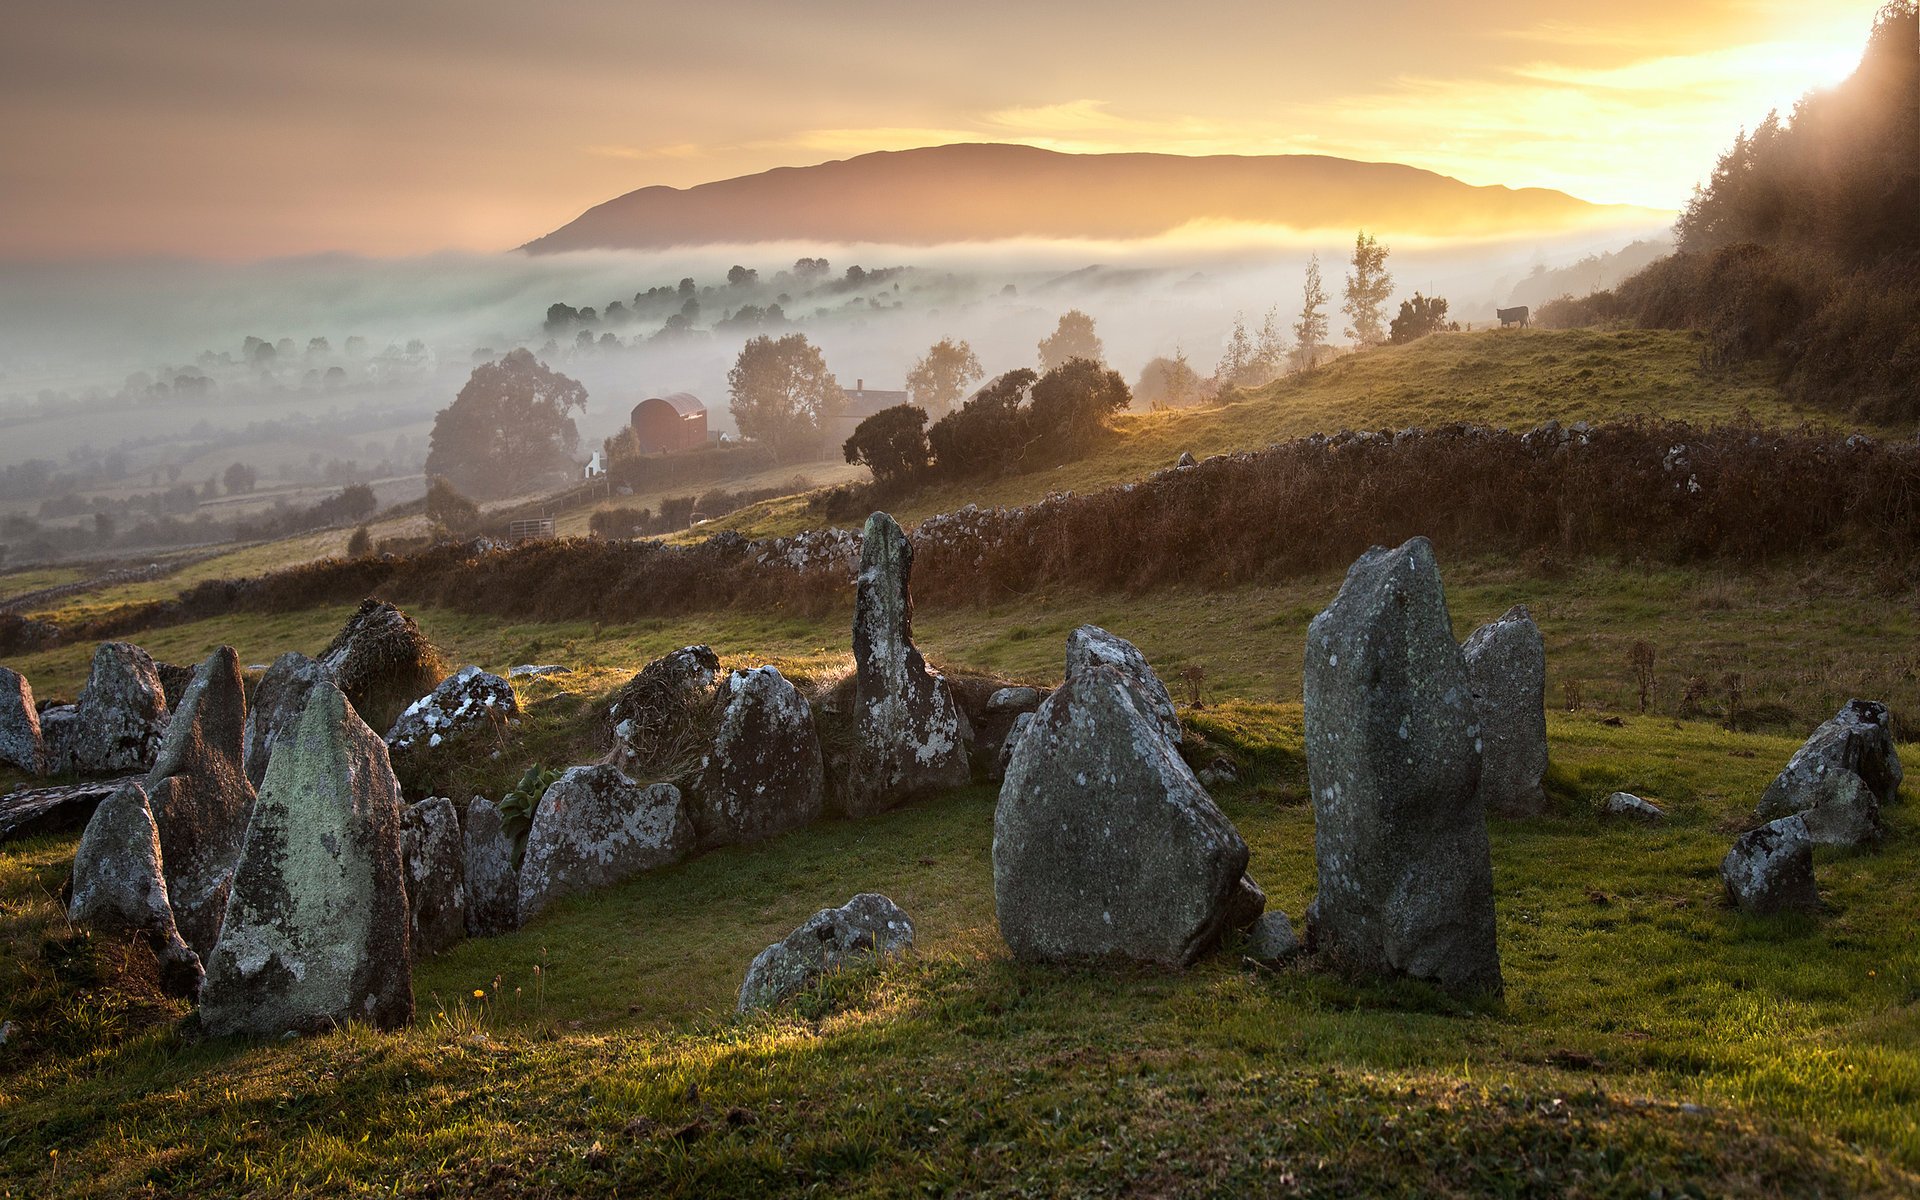 Stones on the hills in England